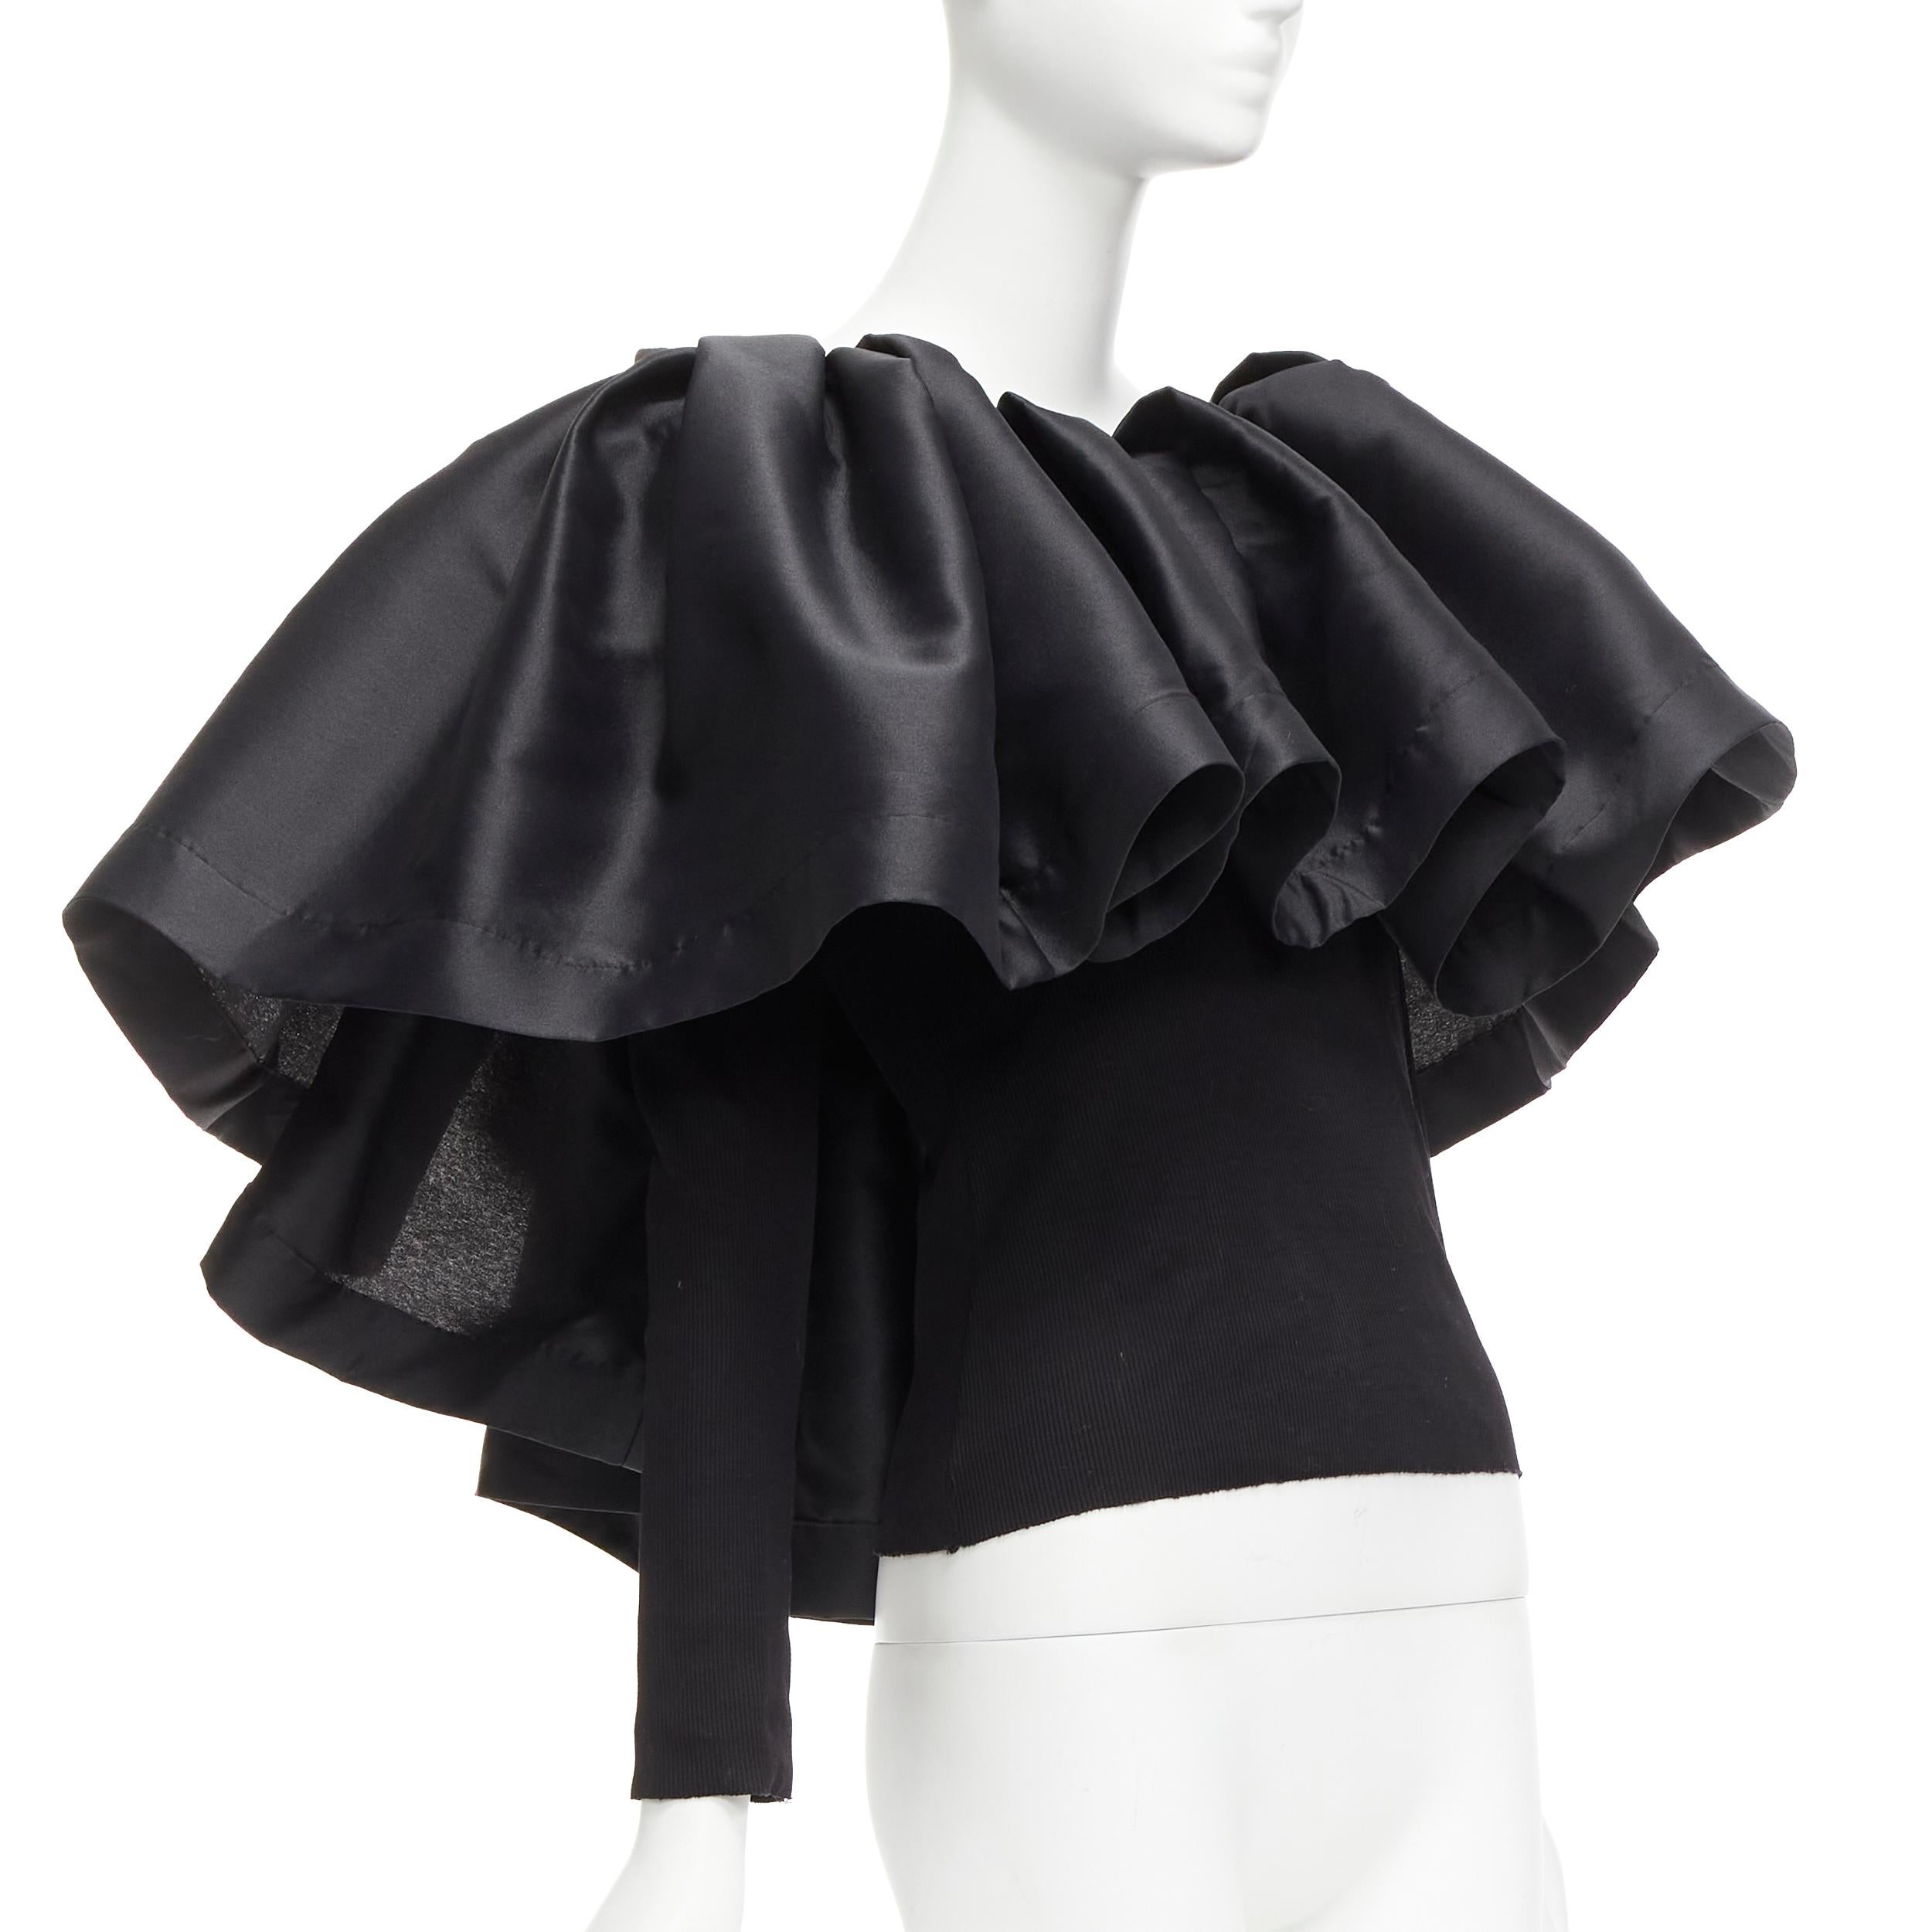 MARQUES ALMEIDA black organic cotton Victorian puff ruffle collar sweater XS
Reference: AAWC/A00980
Brand: Marques Almeida
Material: Cotton
Color: Black
Pattern: Solid
Closure: Pullover
Lining: Black Fabric
Extra Details: Organic cotton main,